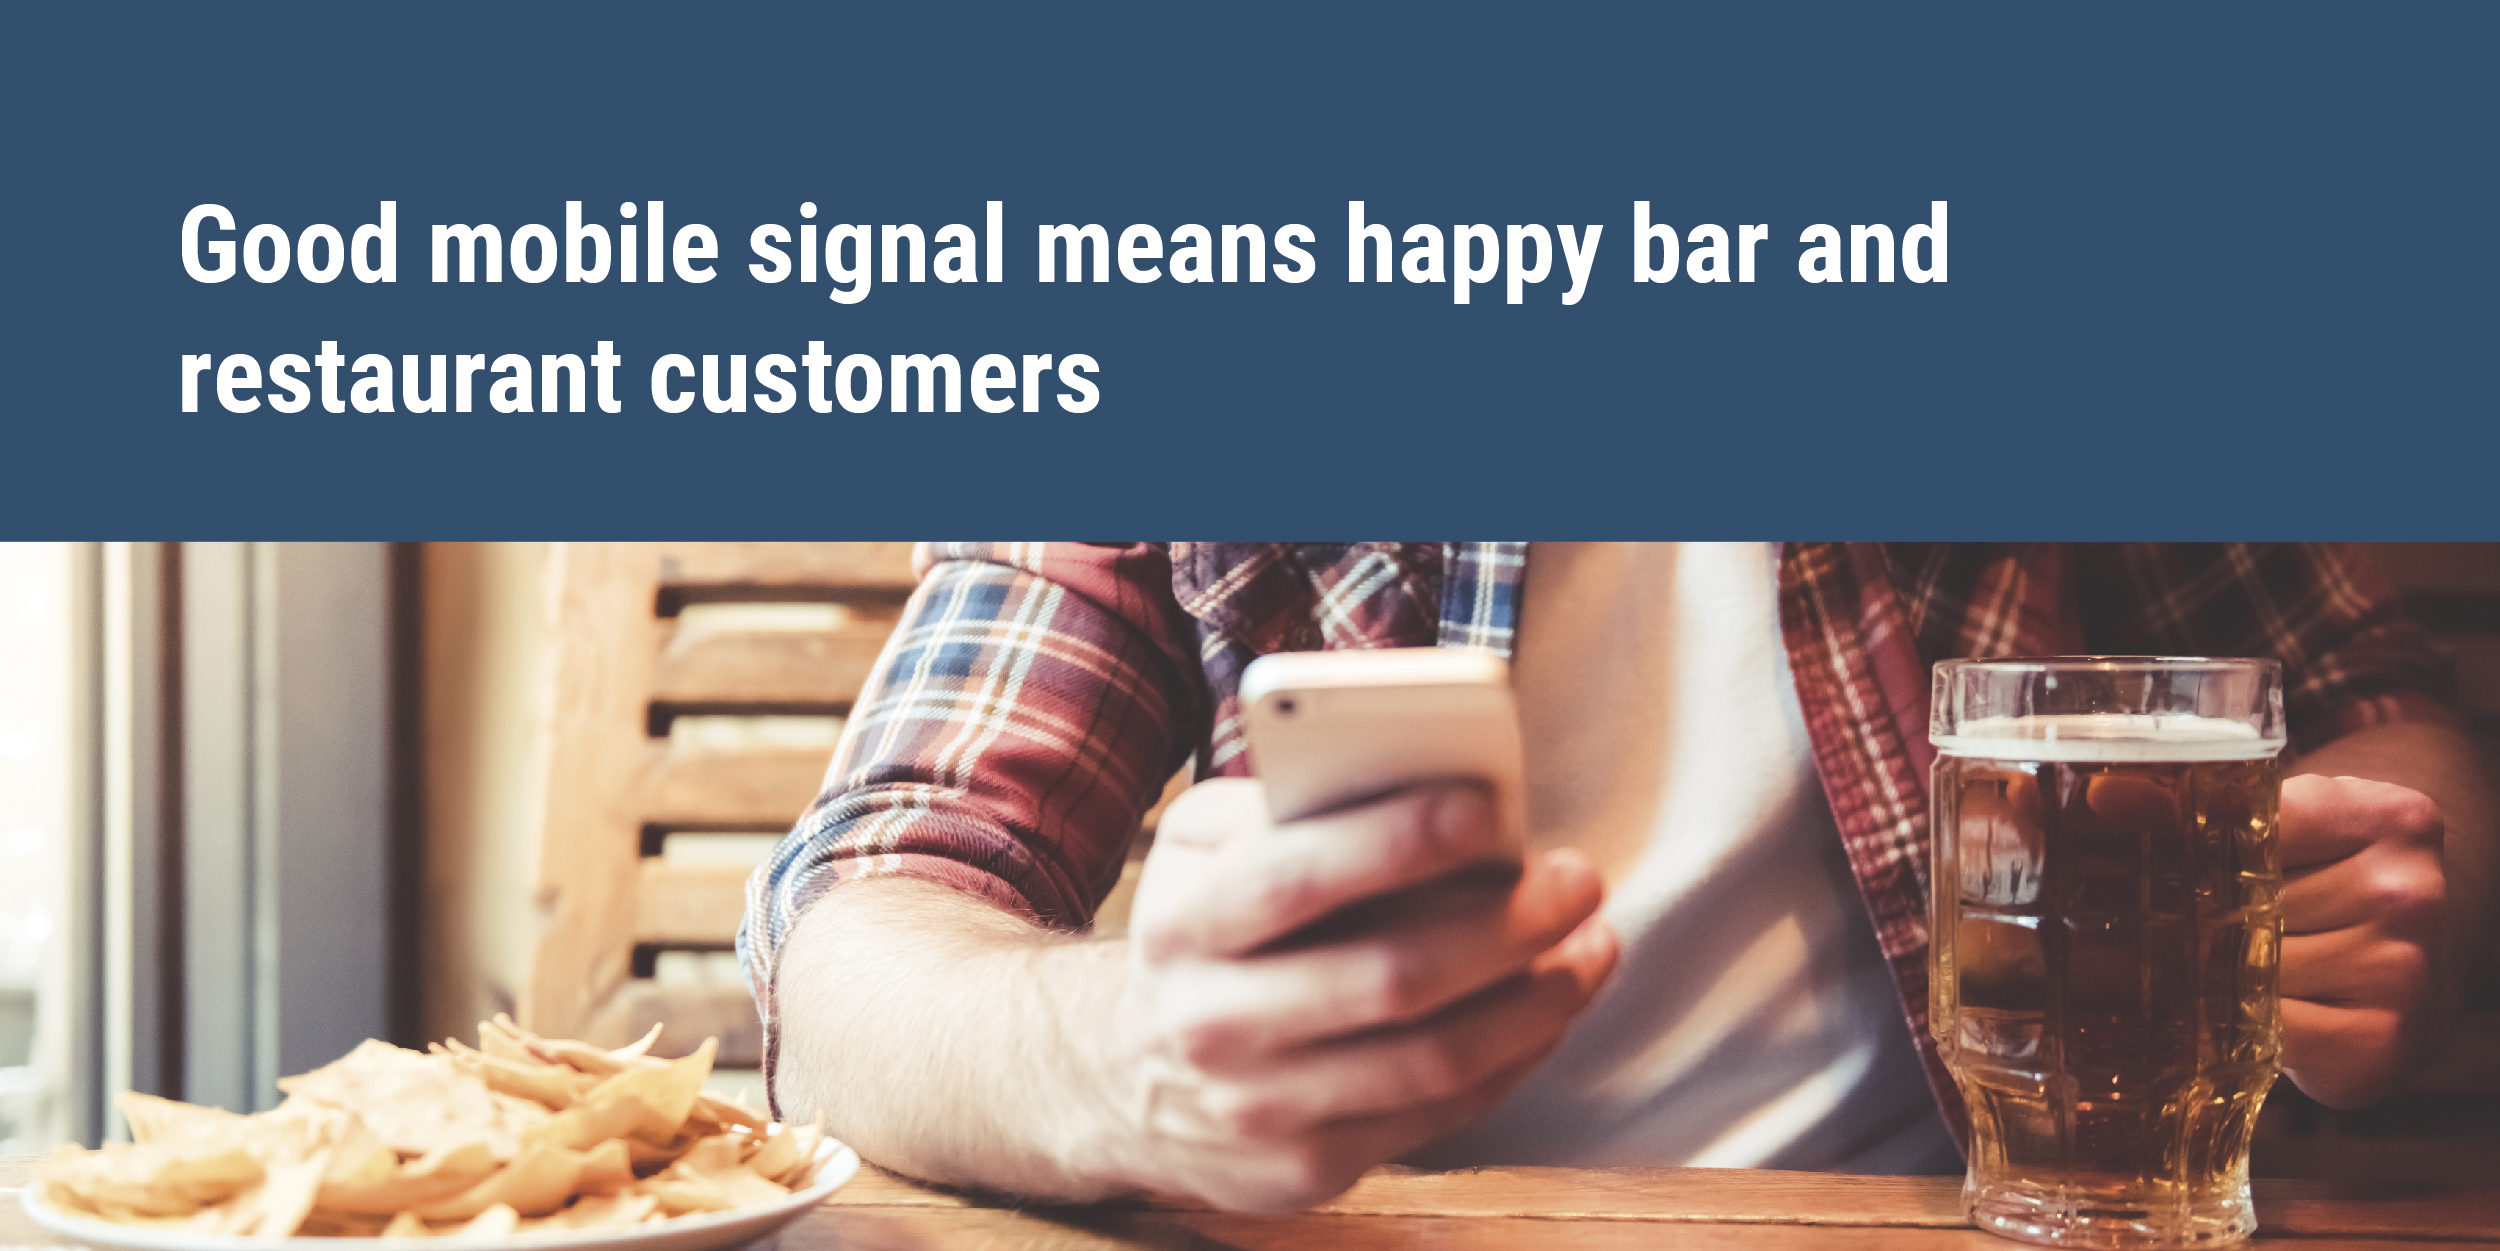 Good mobile signal means happy bar and restaurant customers - man on mobile phone eating and drinking in pub